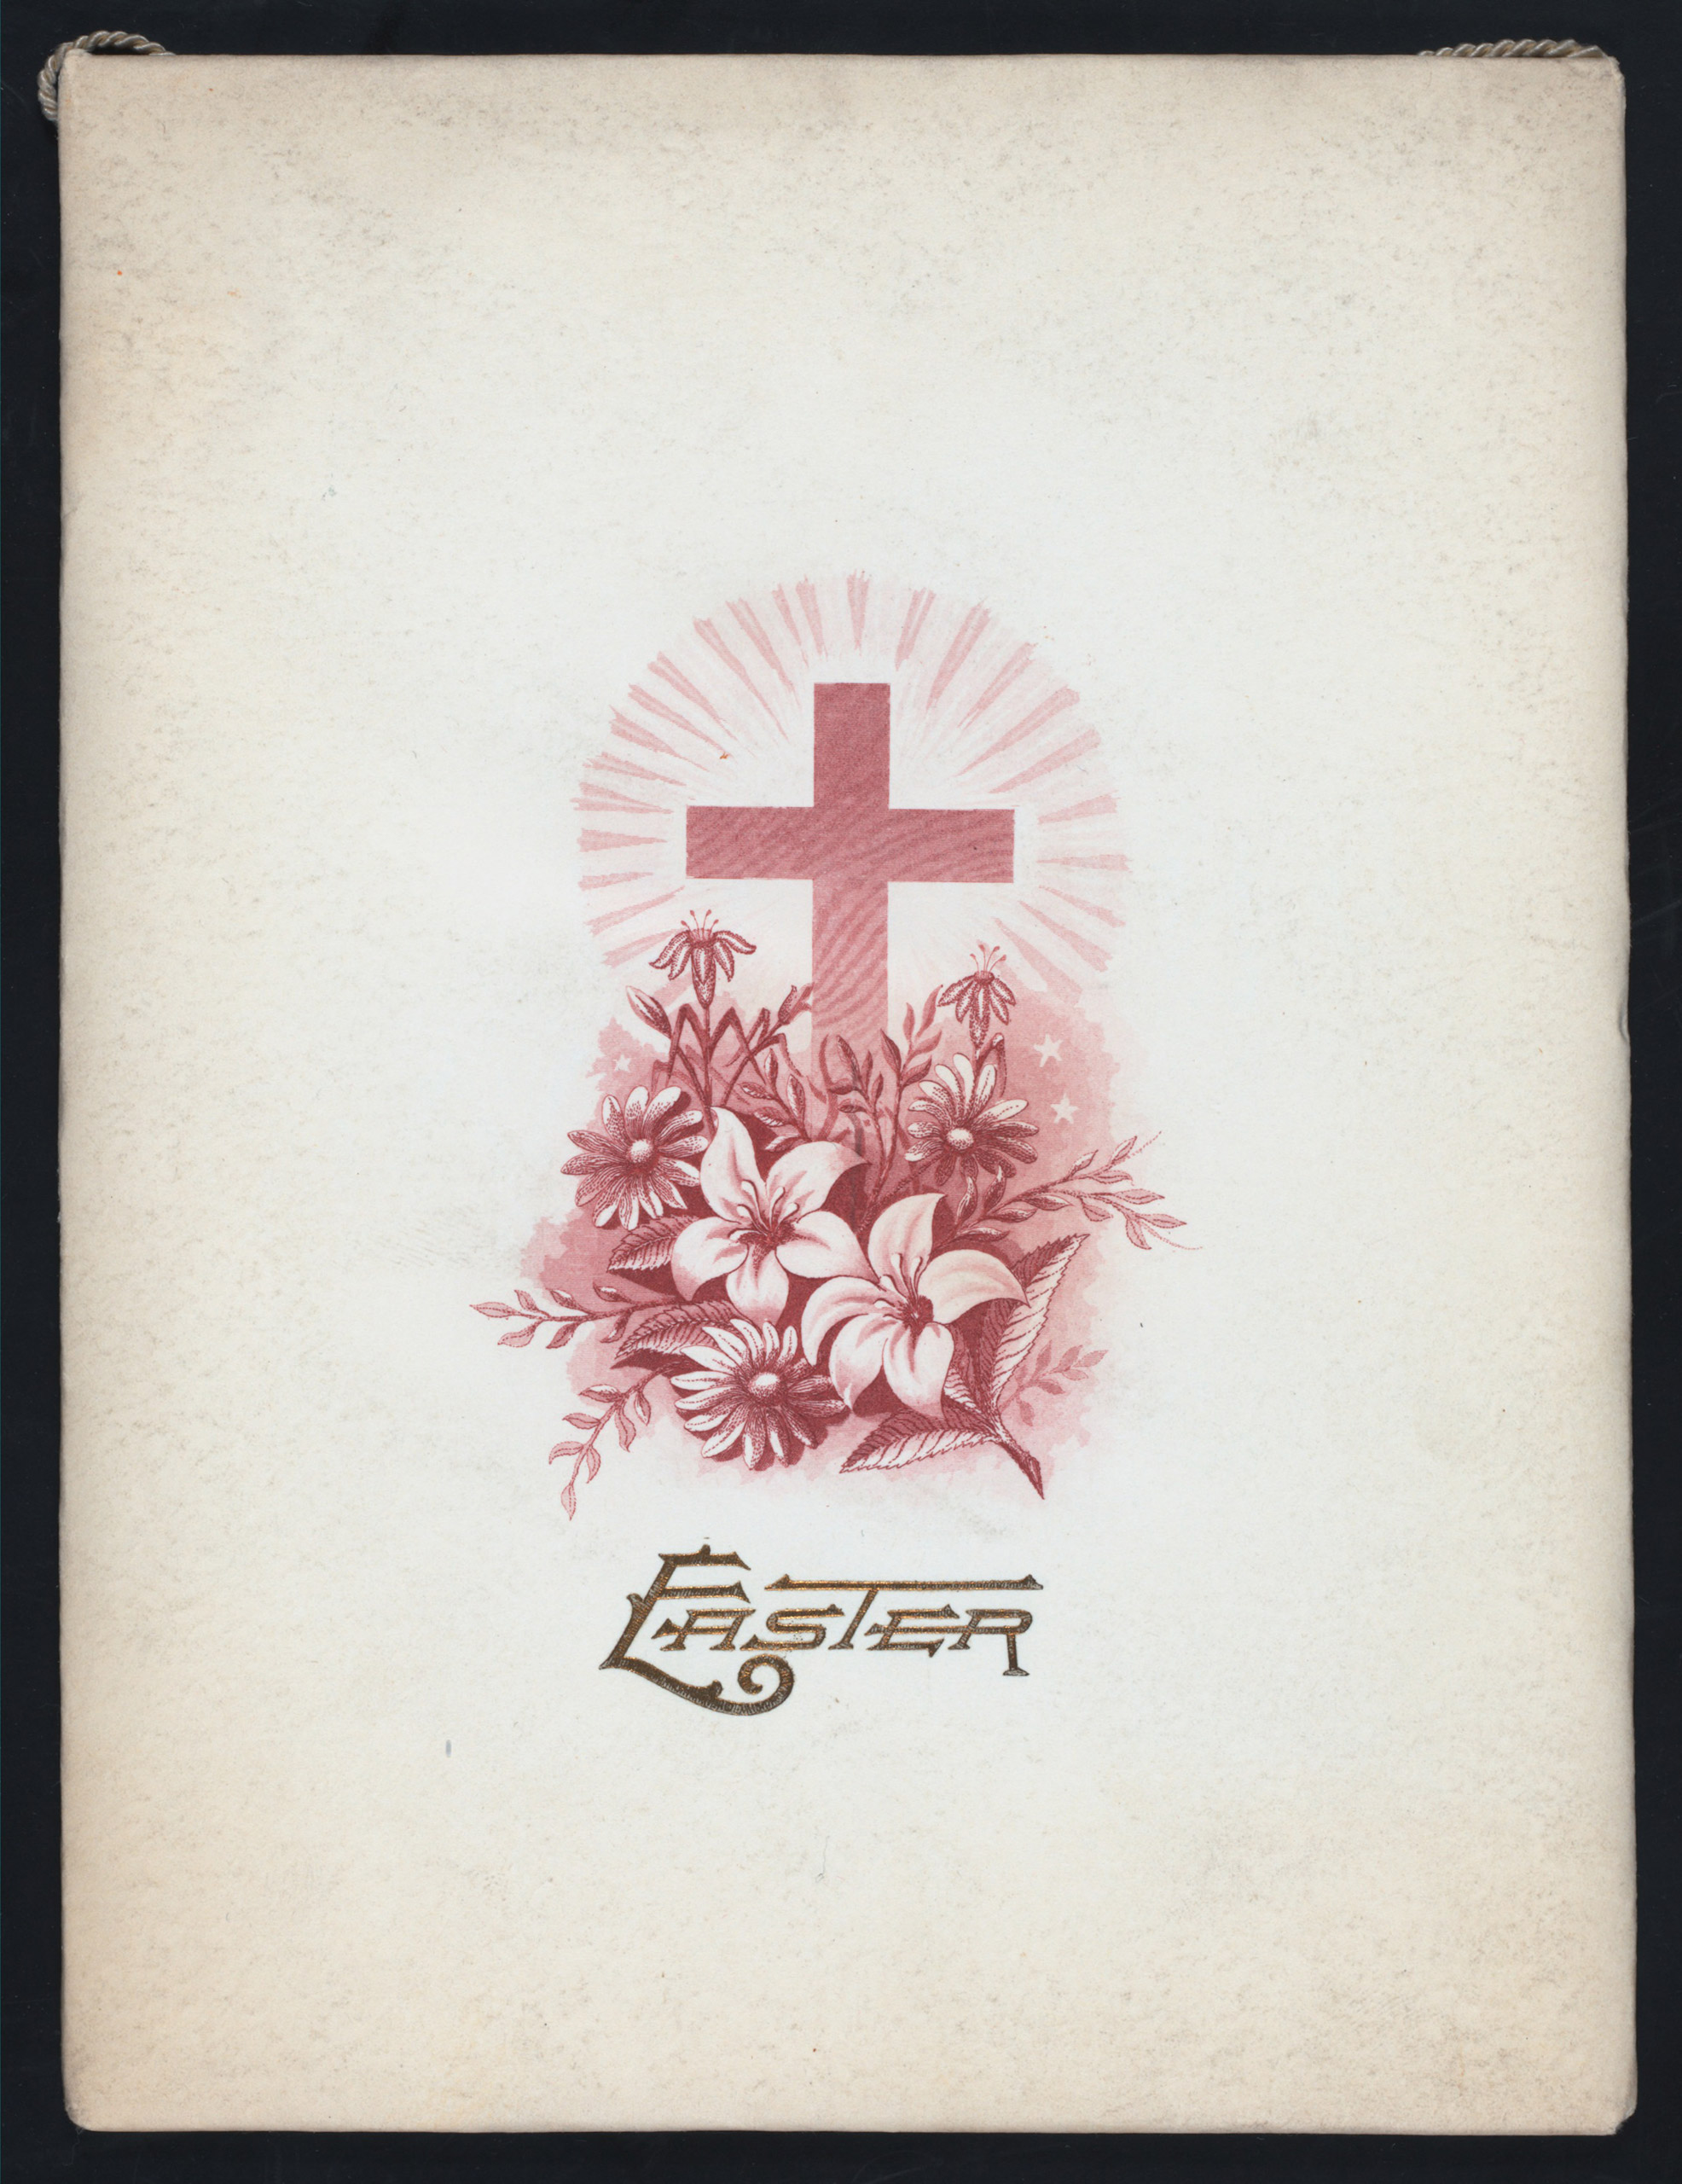 Easter dinner held at the Hawk &amp; Wetherbee at The Windsor in New York, NY. 1893. From the Buttolph collection of menus.